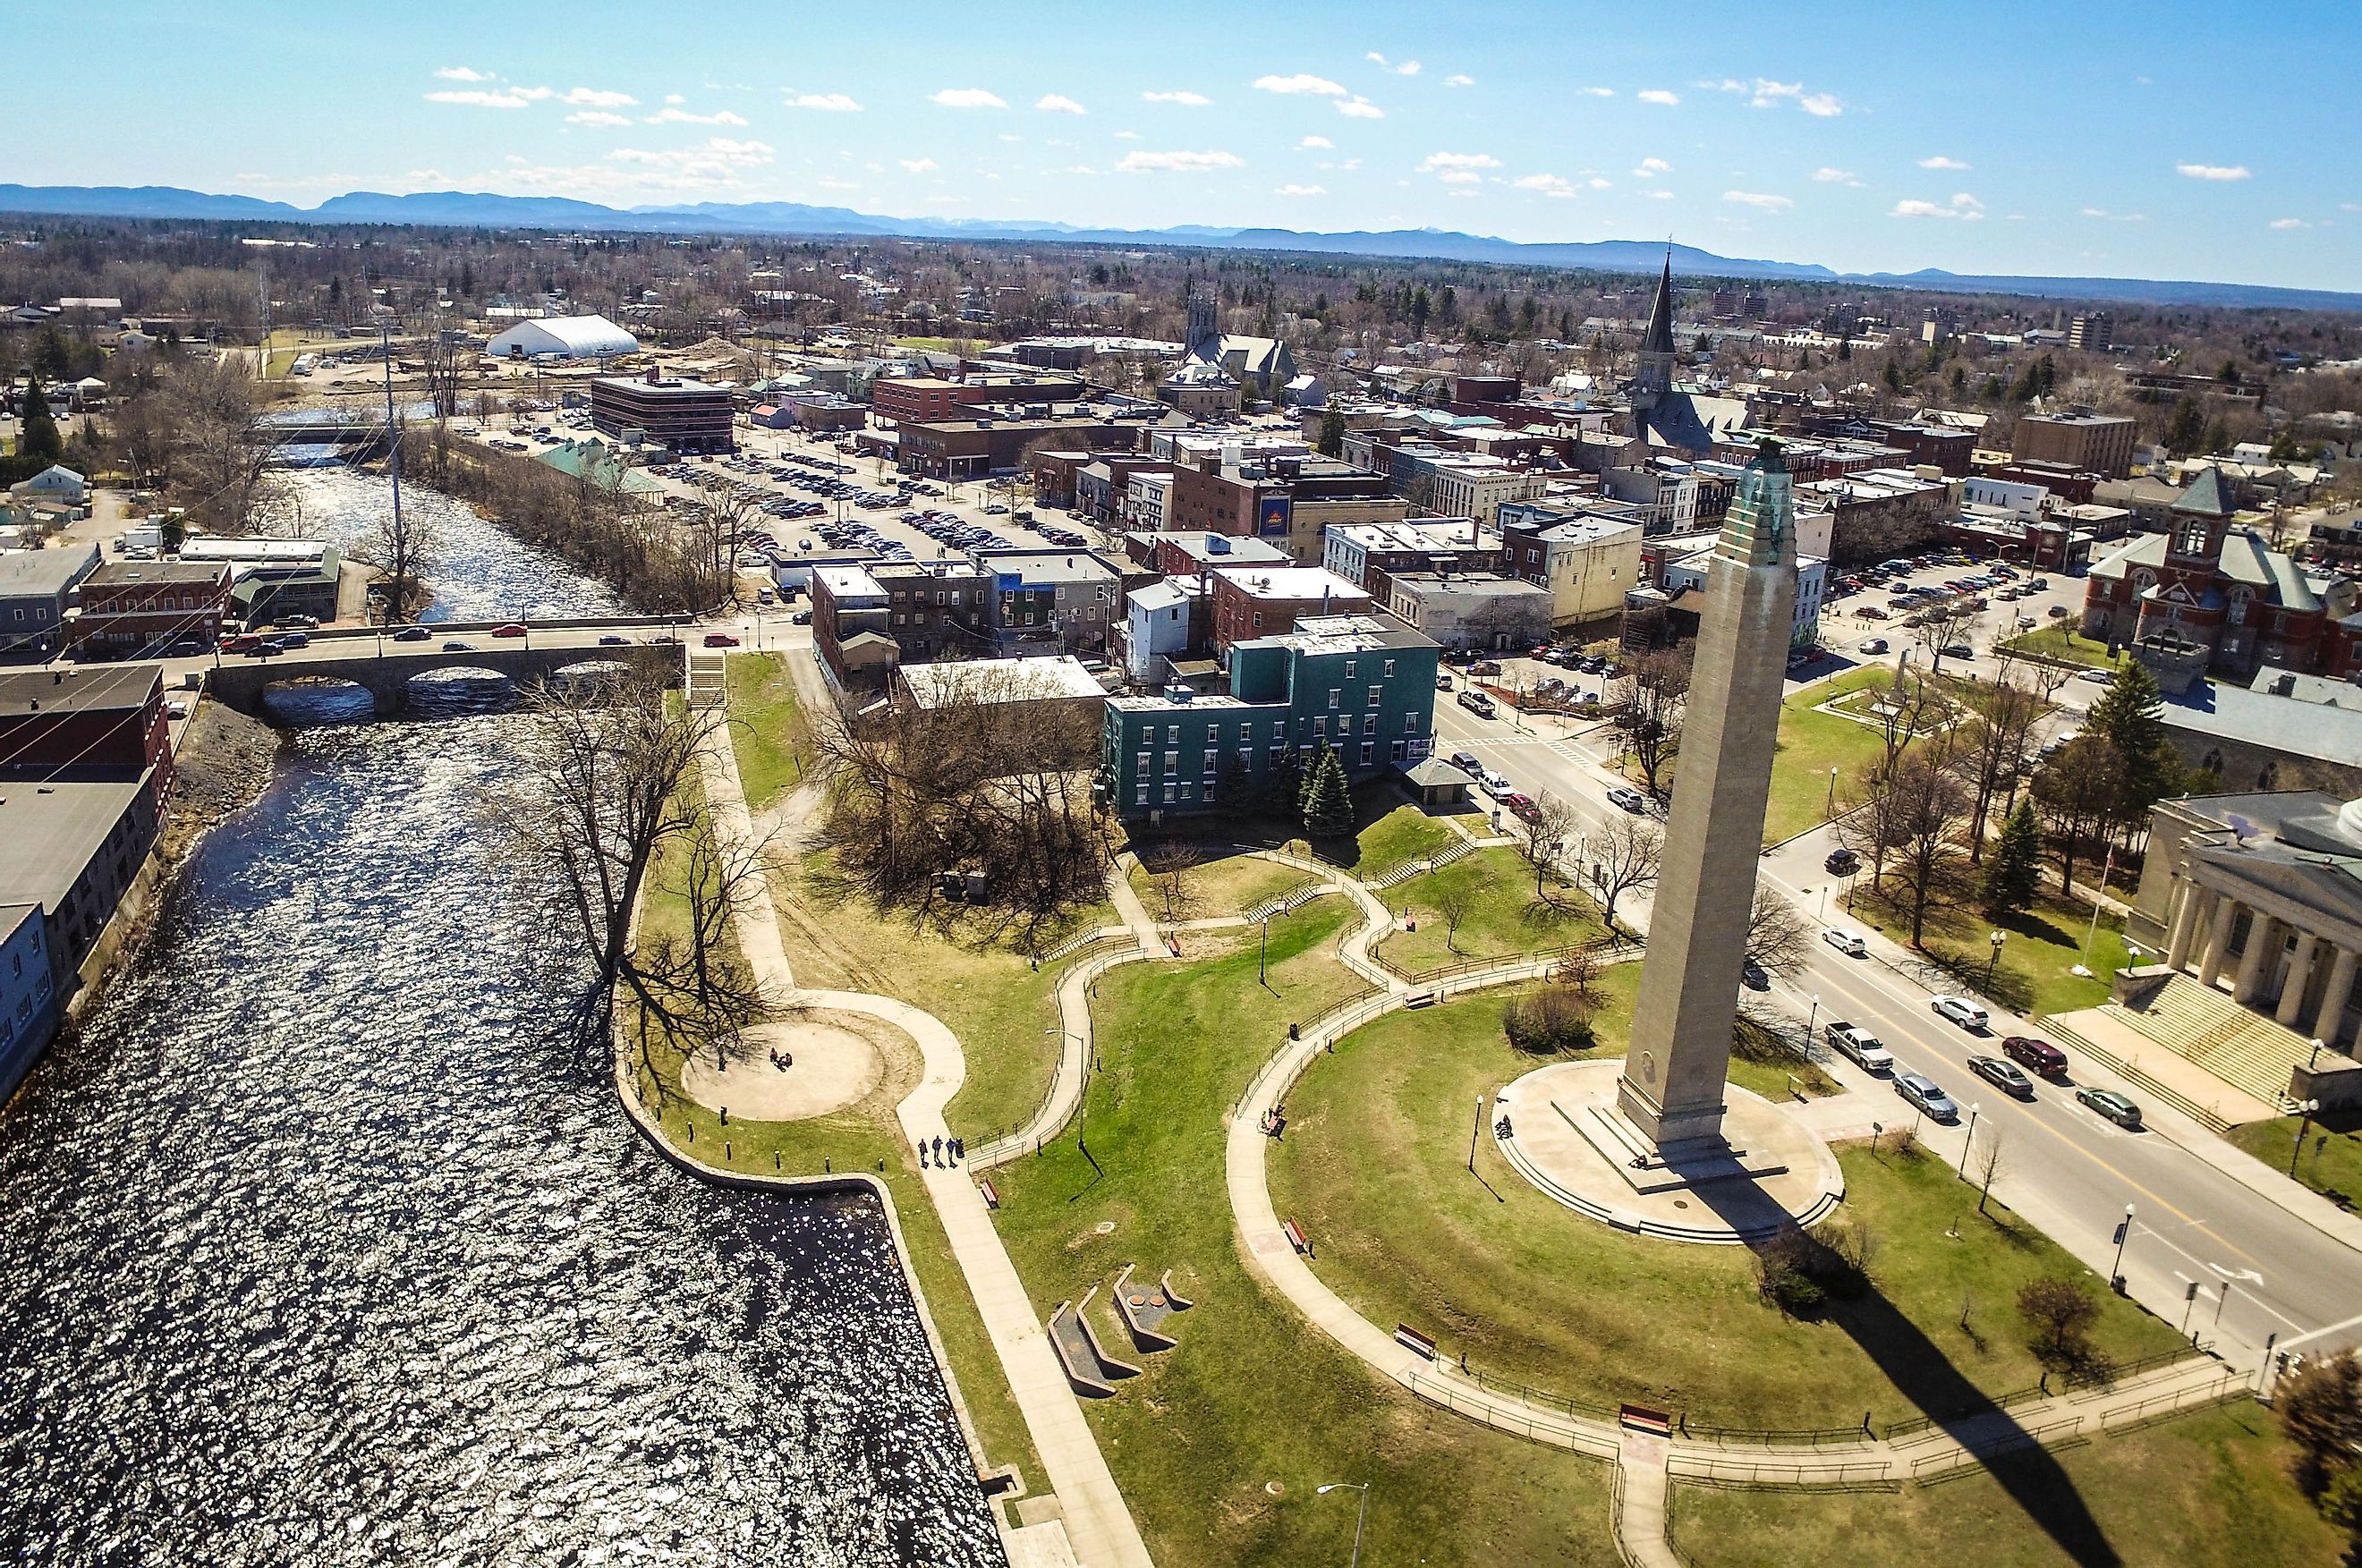 Drone view of Plattsburgh, New York, showcasing its scenic landscape and urban features.